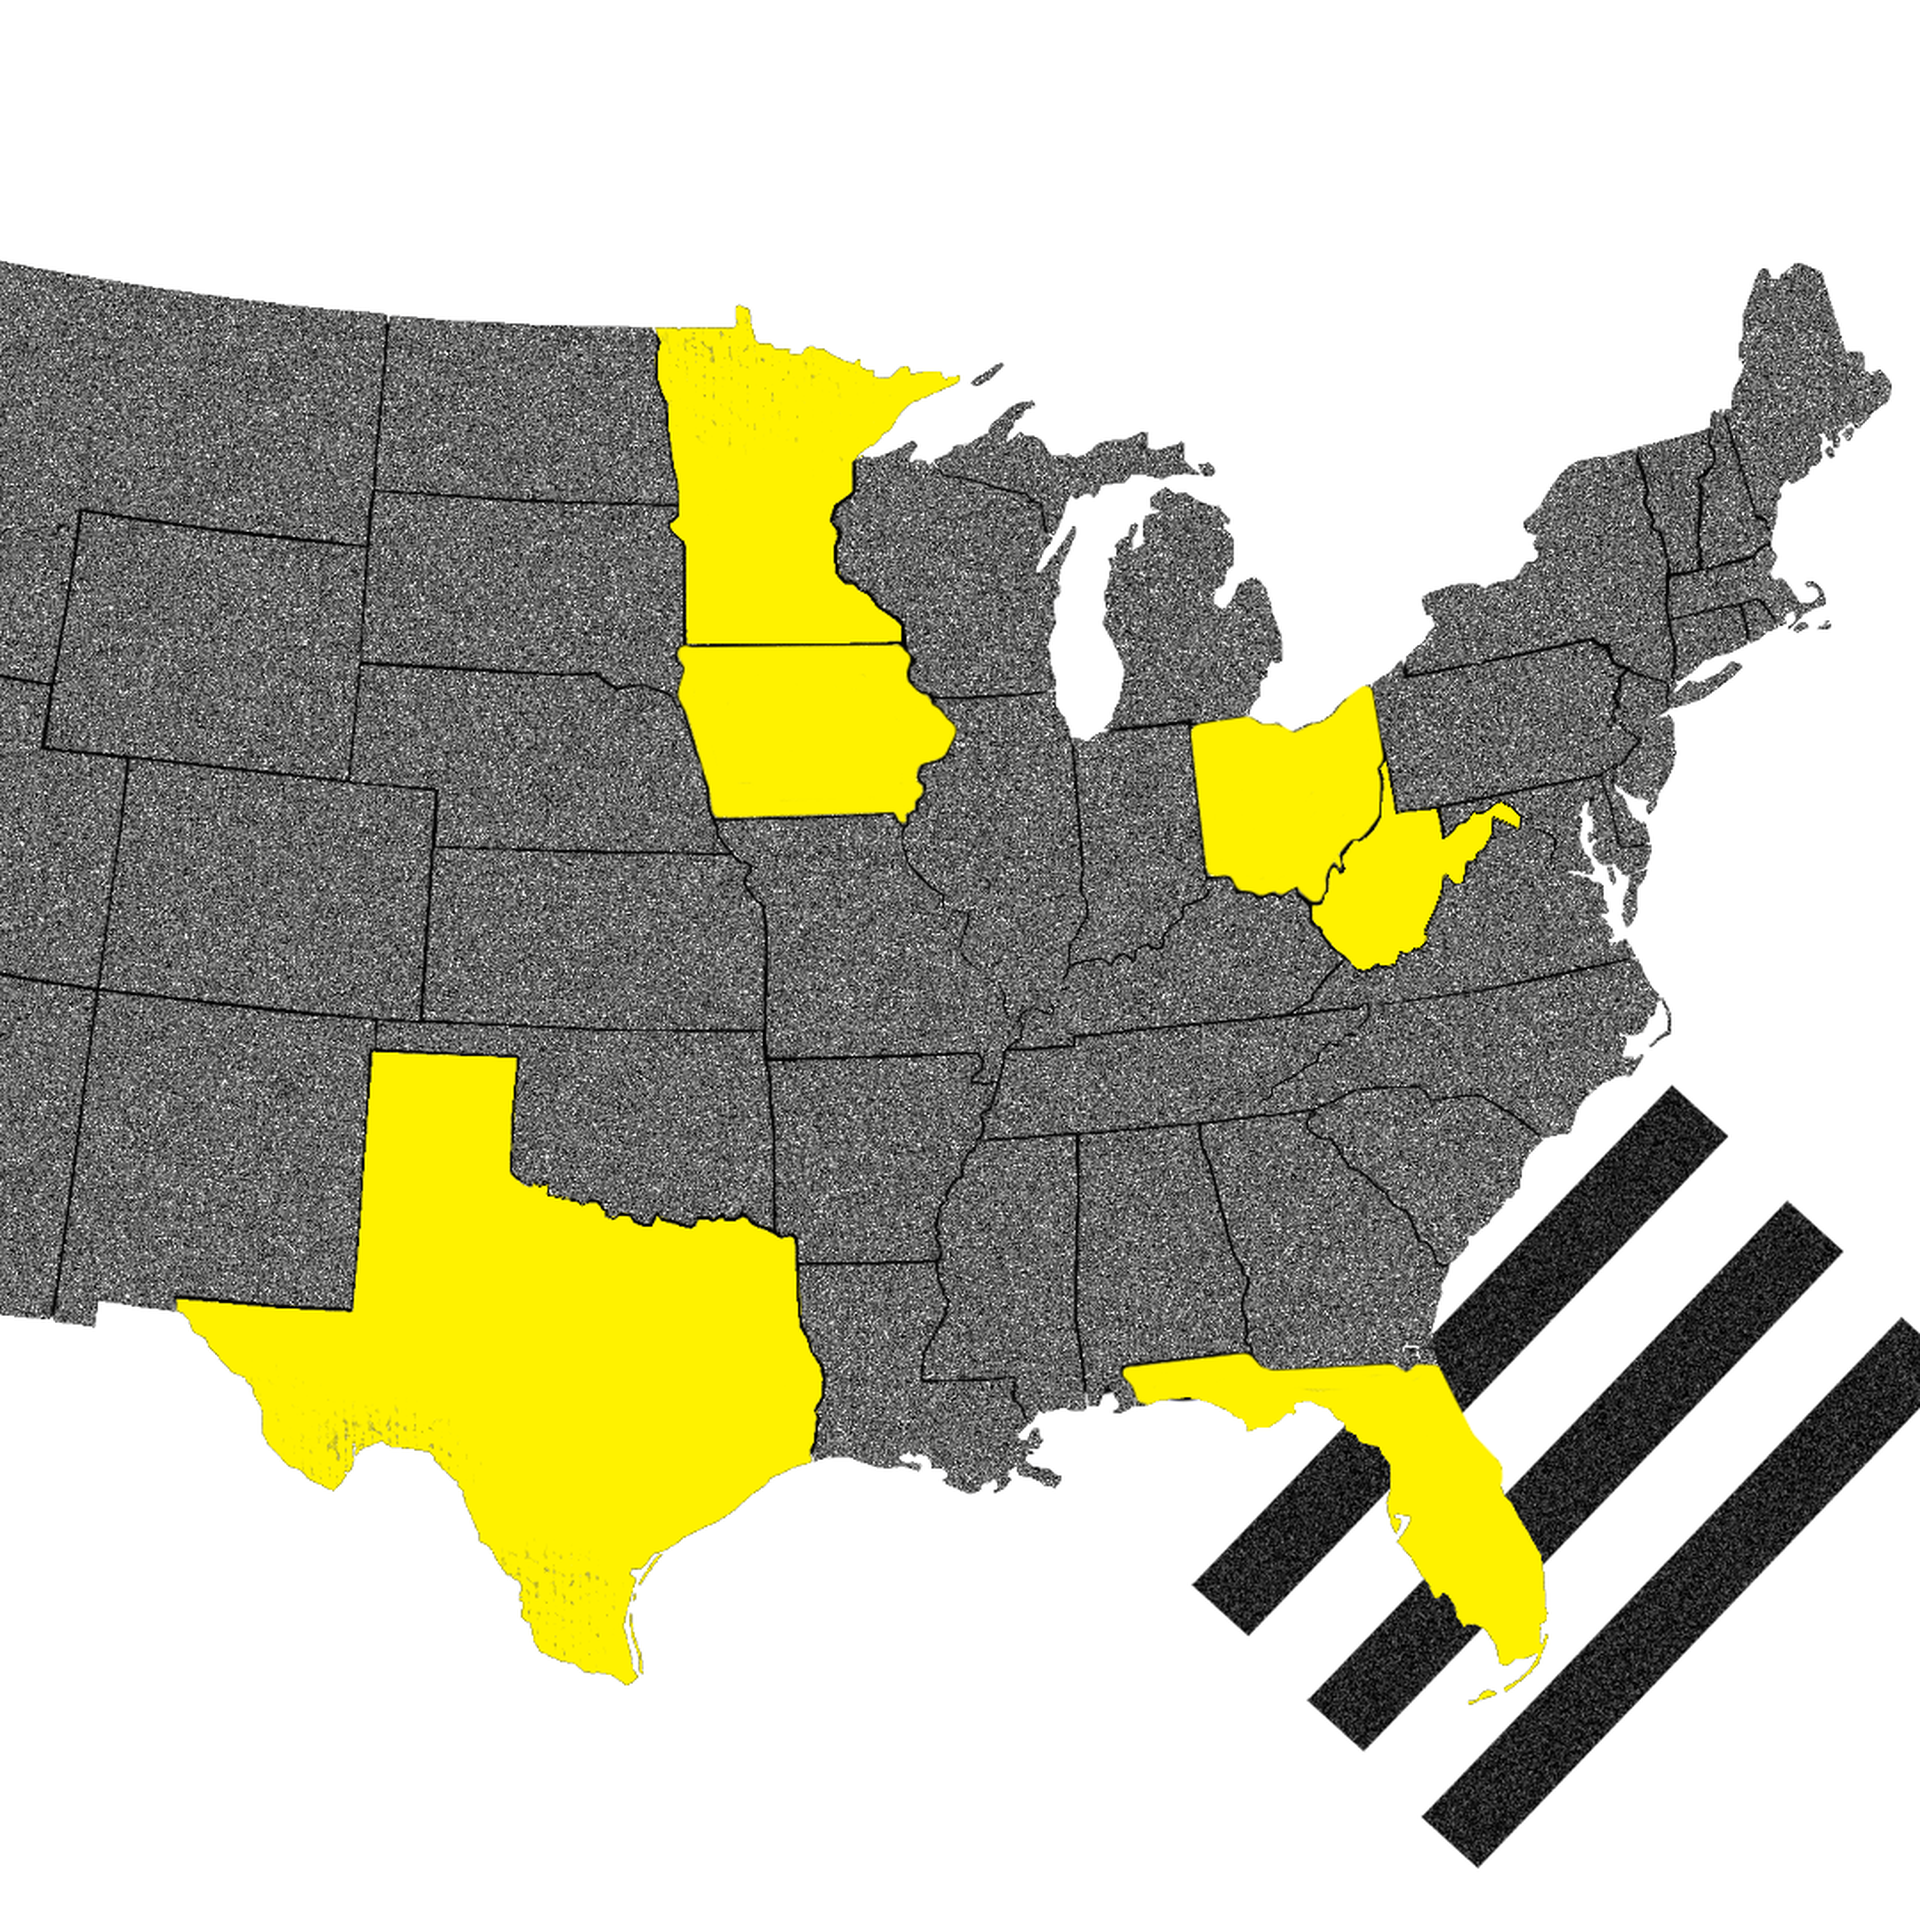 A map of the United States with the Axios 8 states highlighted